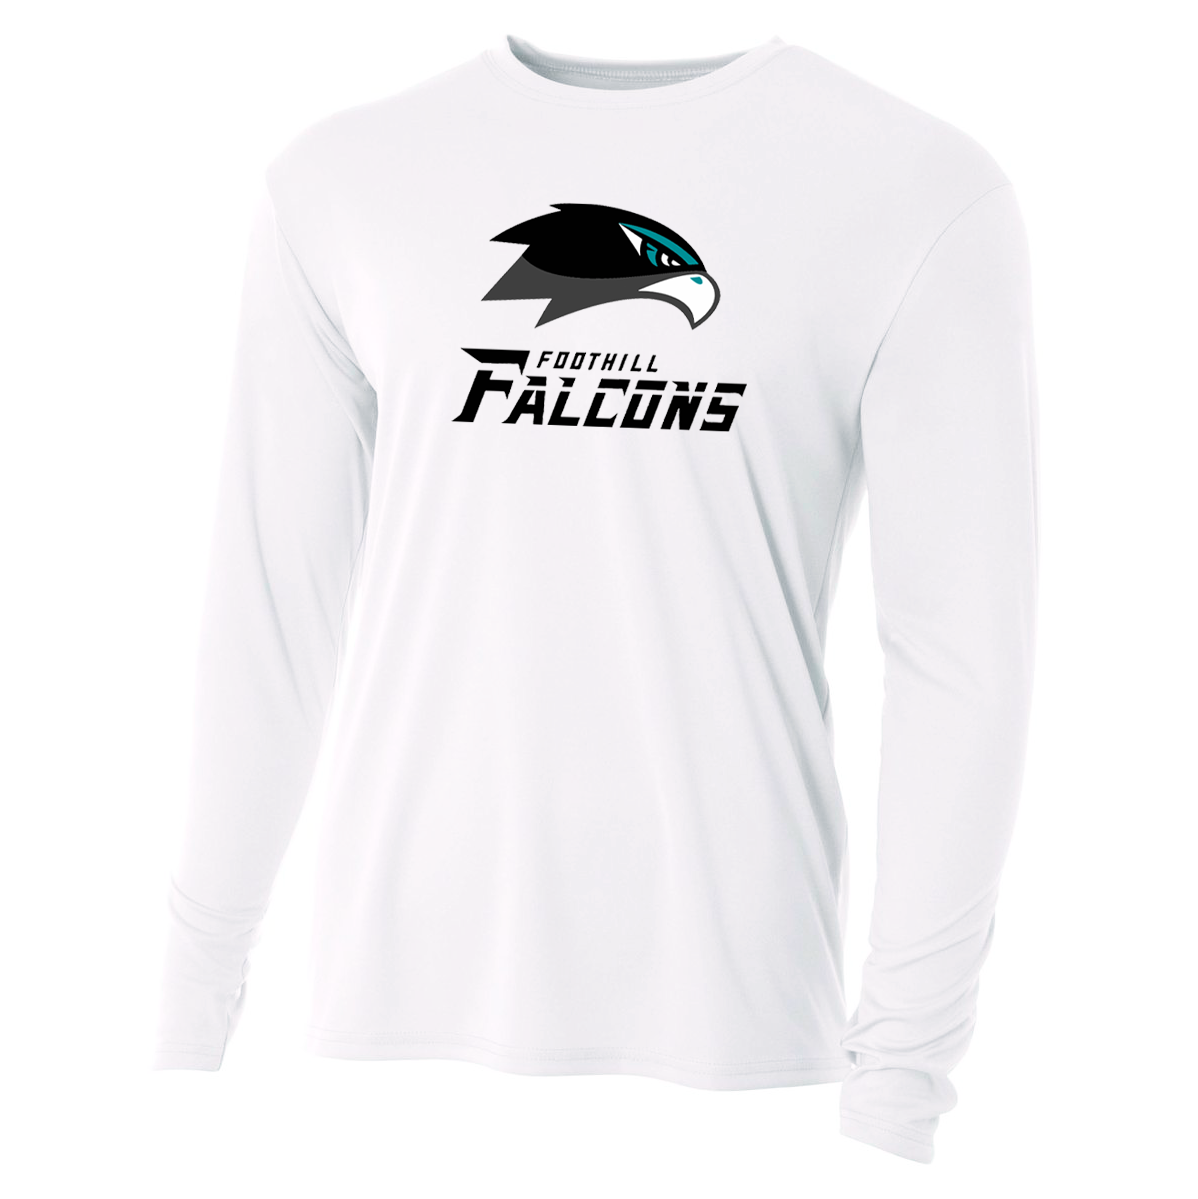 Foothill Falcons Cooling Performance Long Sleeve Crew